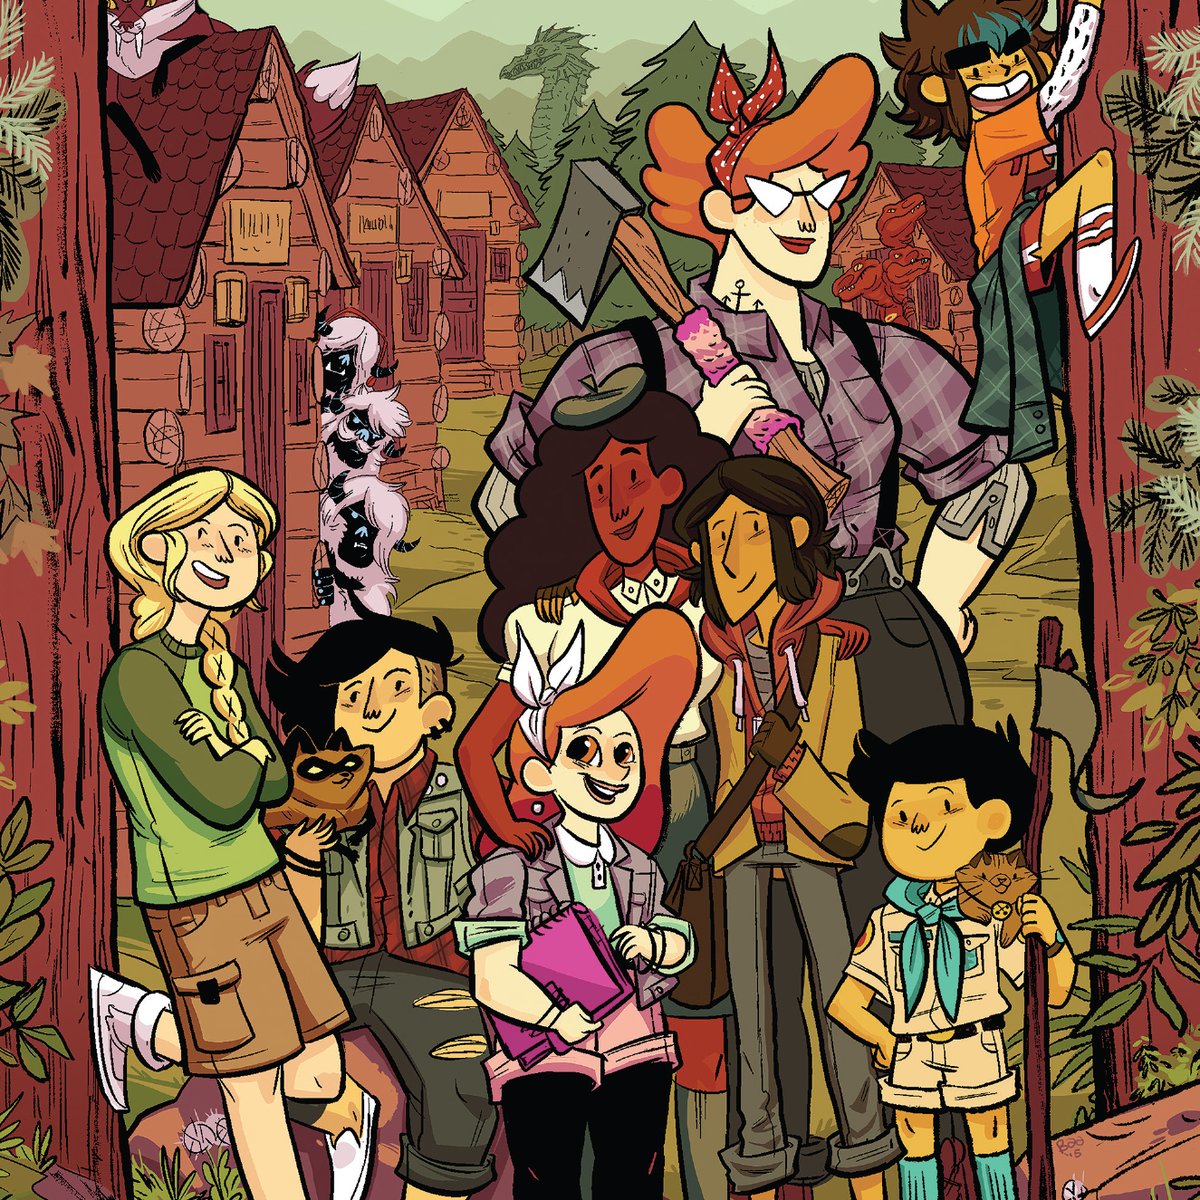 Sending extra love to our trans and nonbinary Lumberjanes today. You're amazing and we love you! 💖